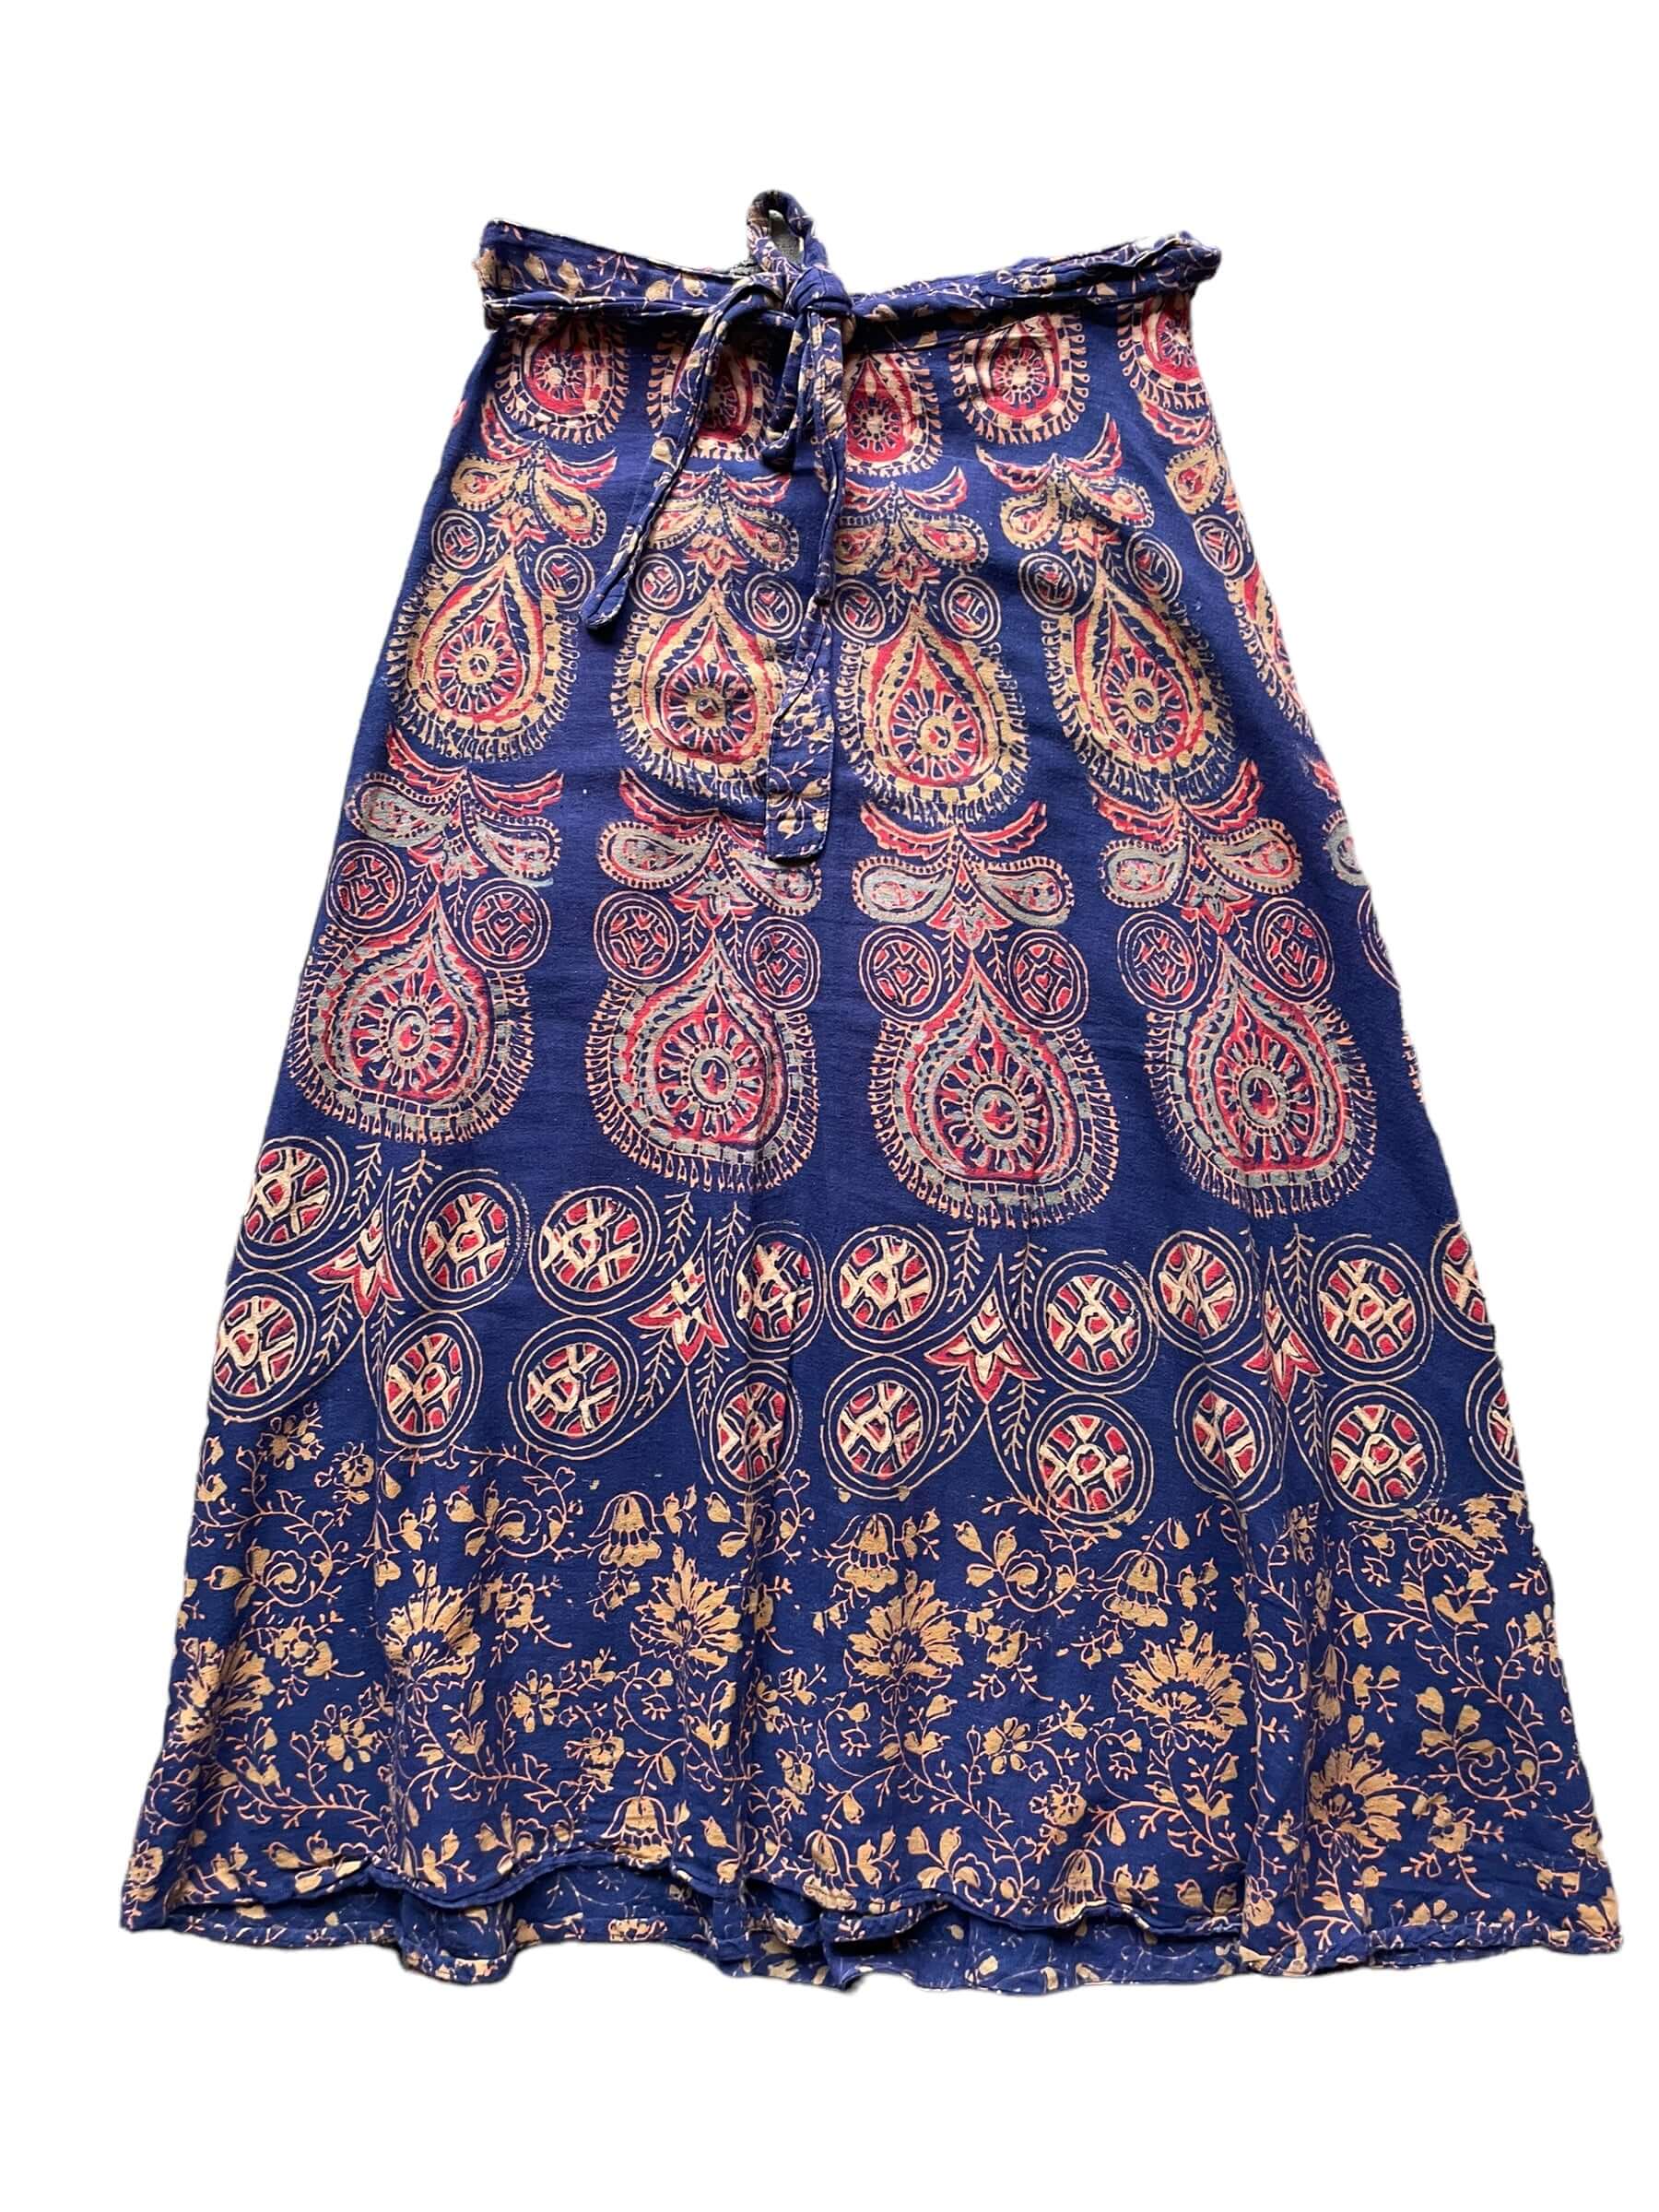 Full front view of Vintage 1970s Indian Cotton Navy Floral Wrap Skirt SZ M-XL | Barn Owl Ladies Clothing | Seattle True Vintage